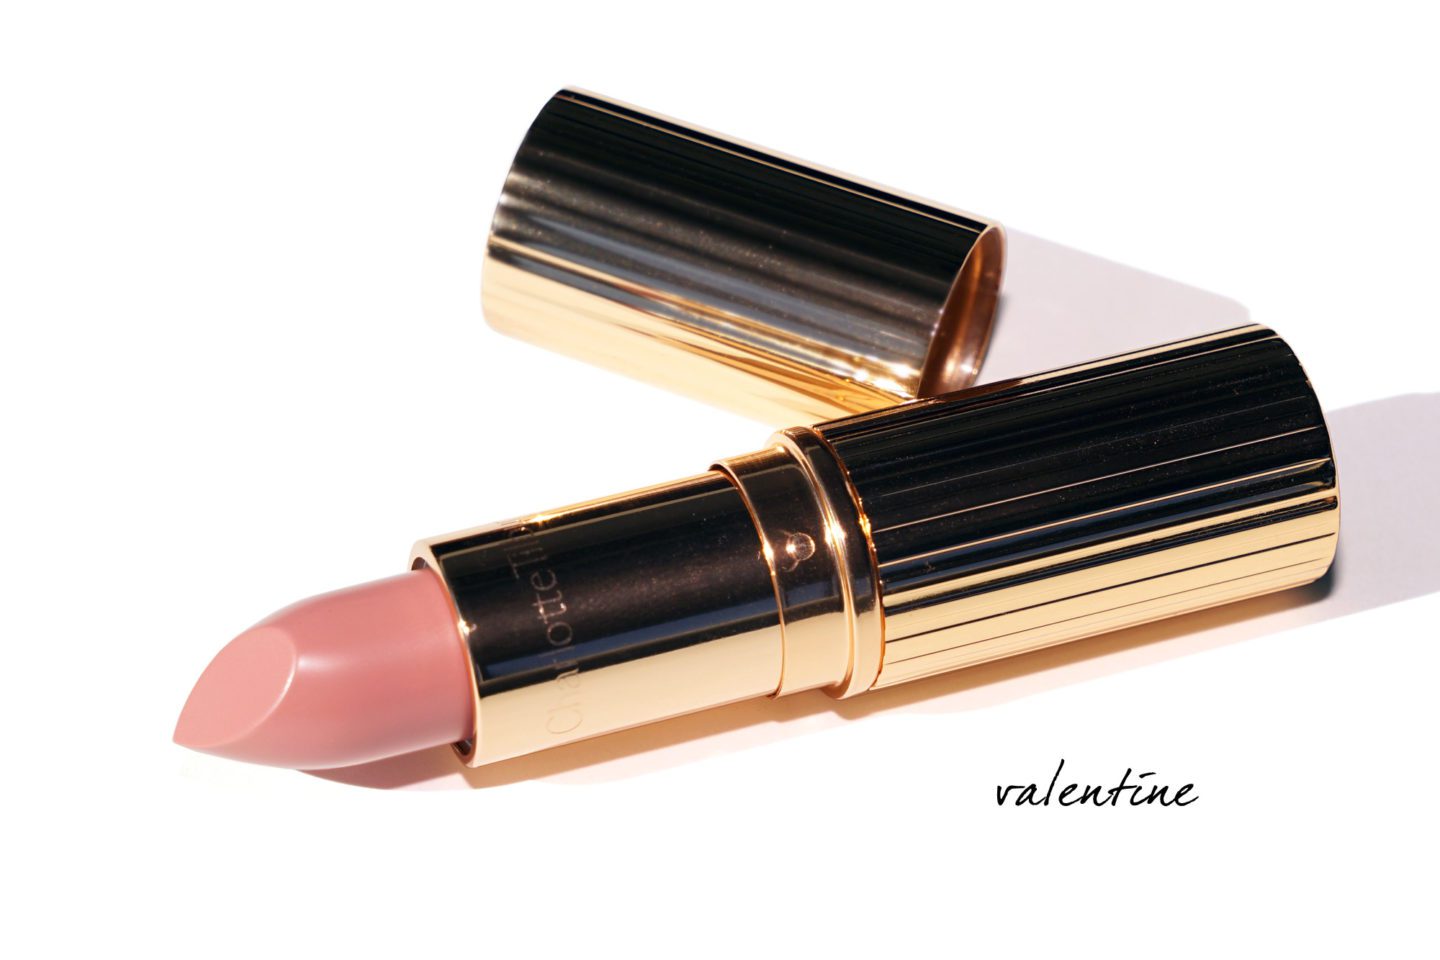 Charlotte Tilbury Valentine KISSING Lipstick Review | The Beauty Look Book